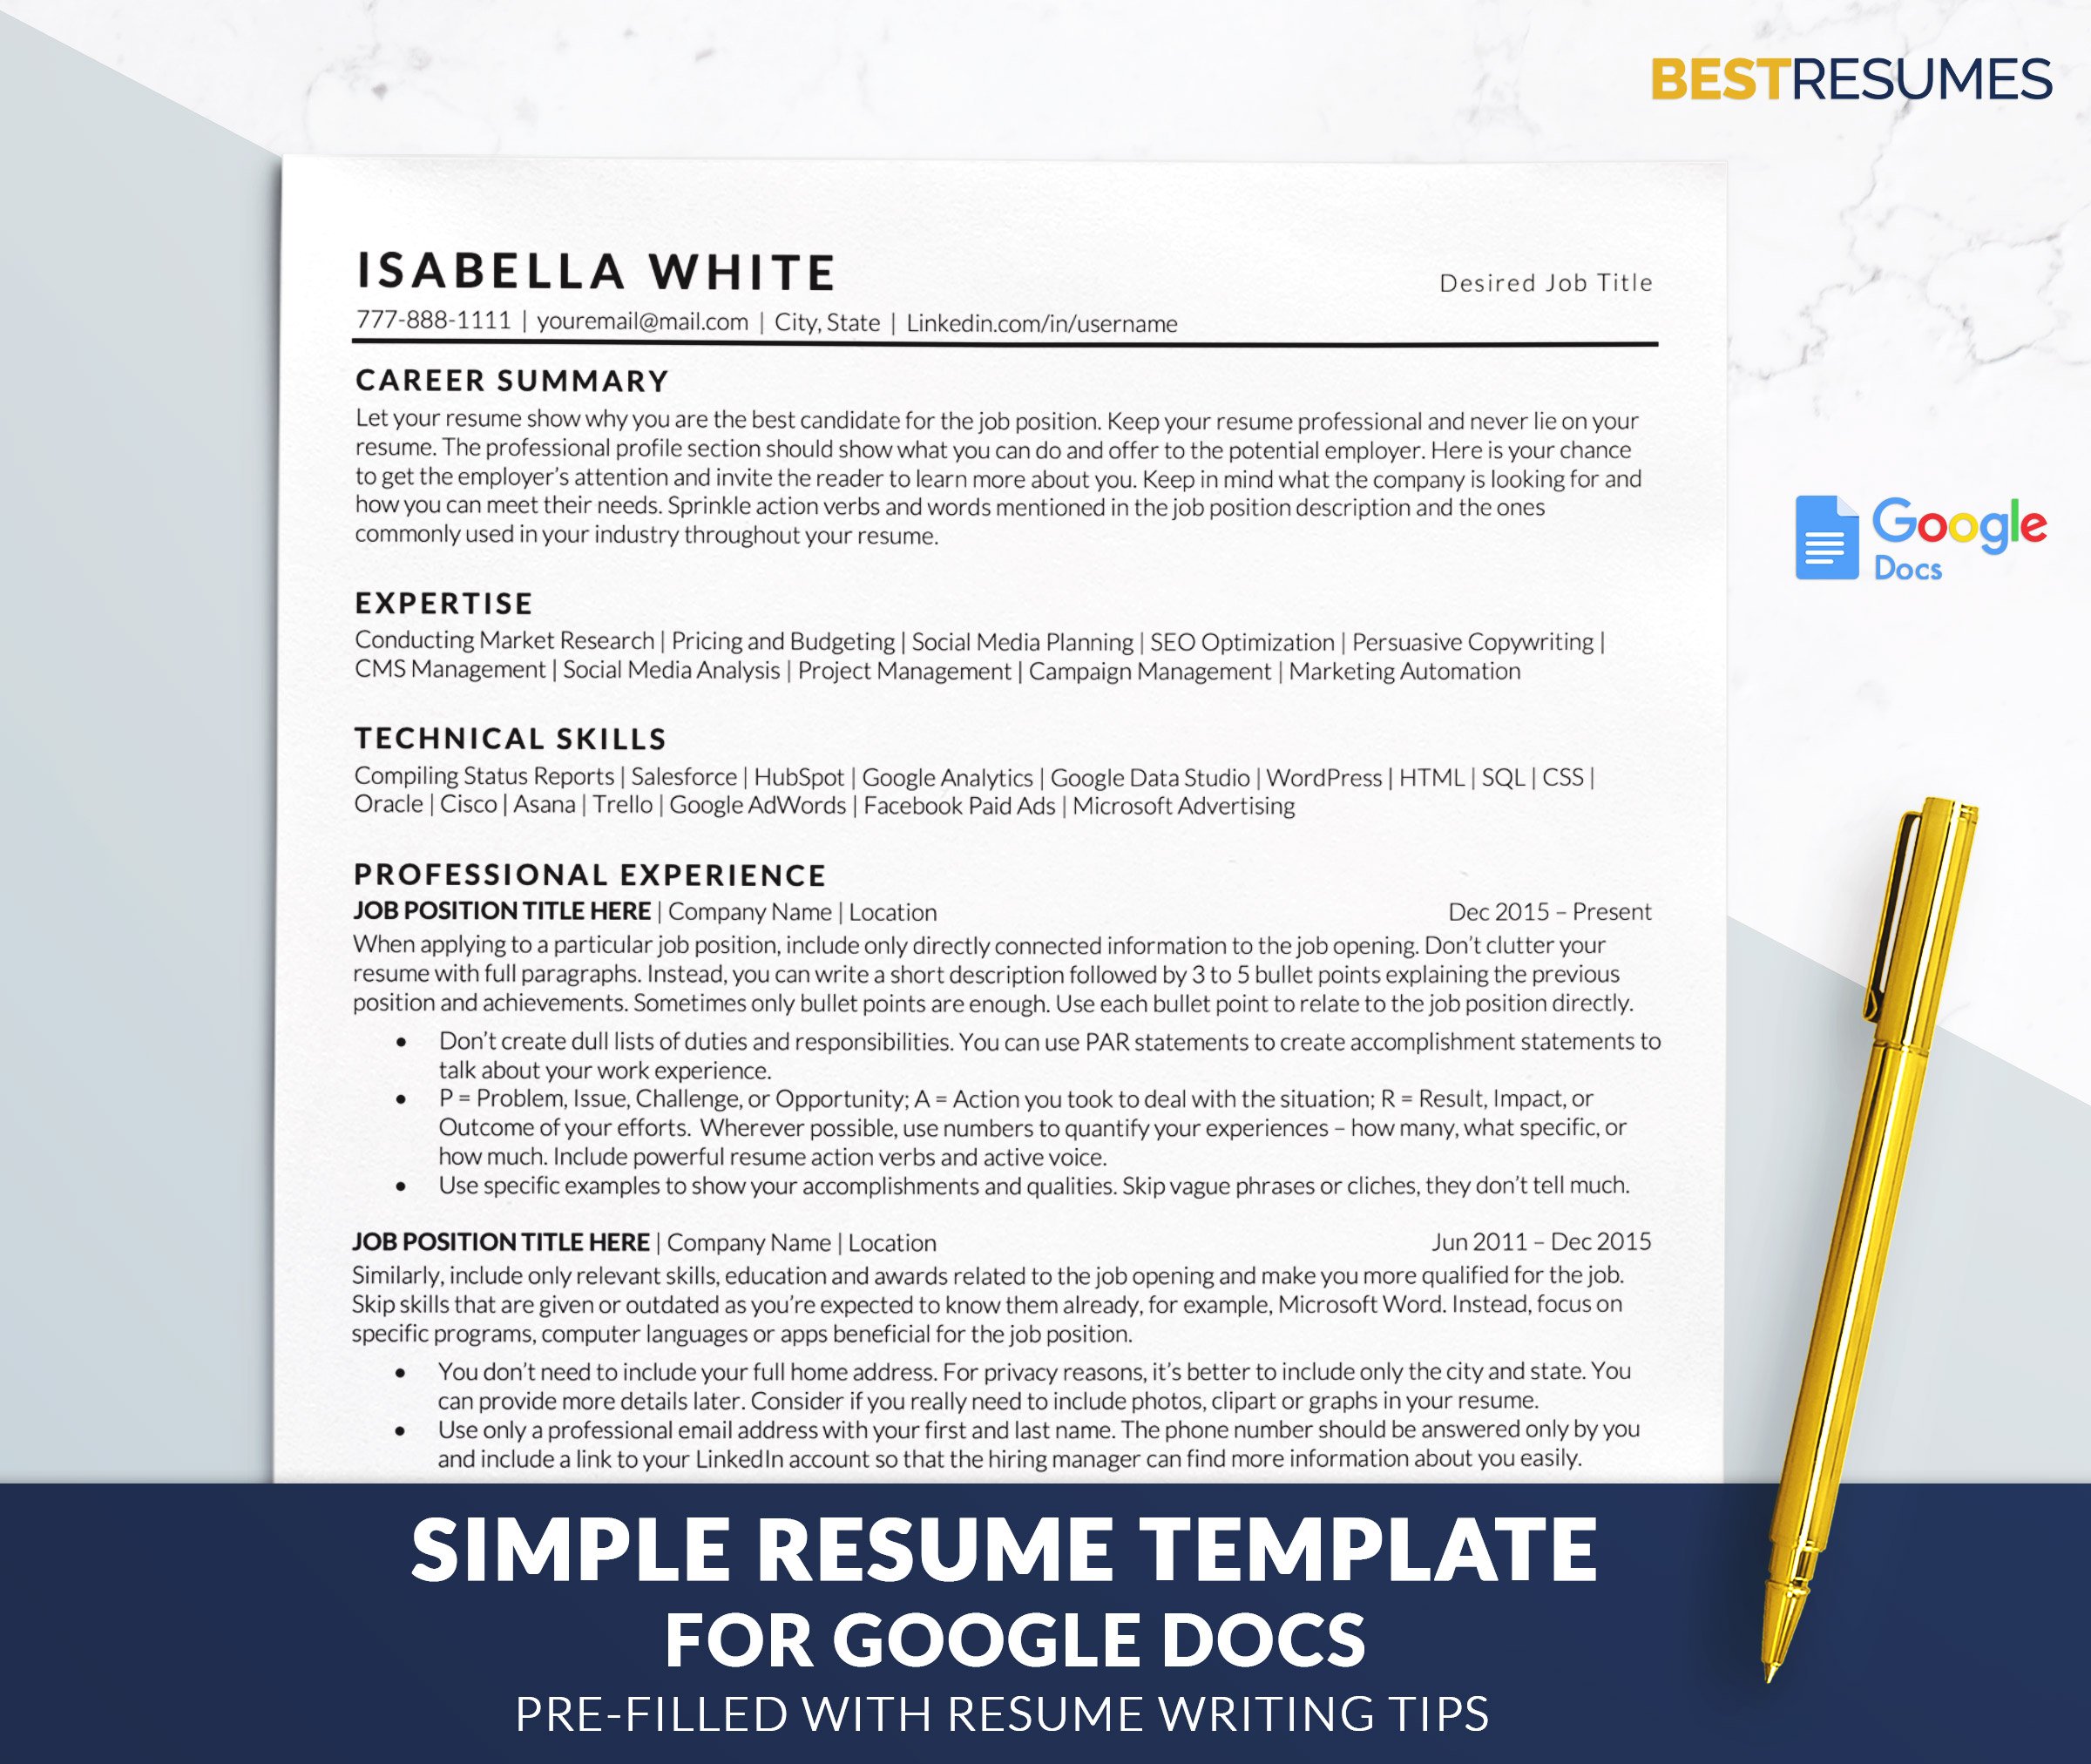 Google Docs Resume Template Simple cover image.